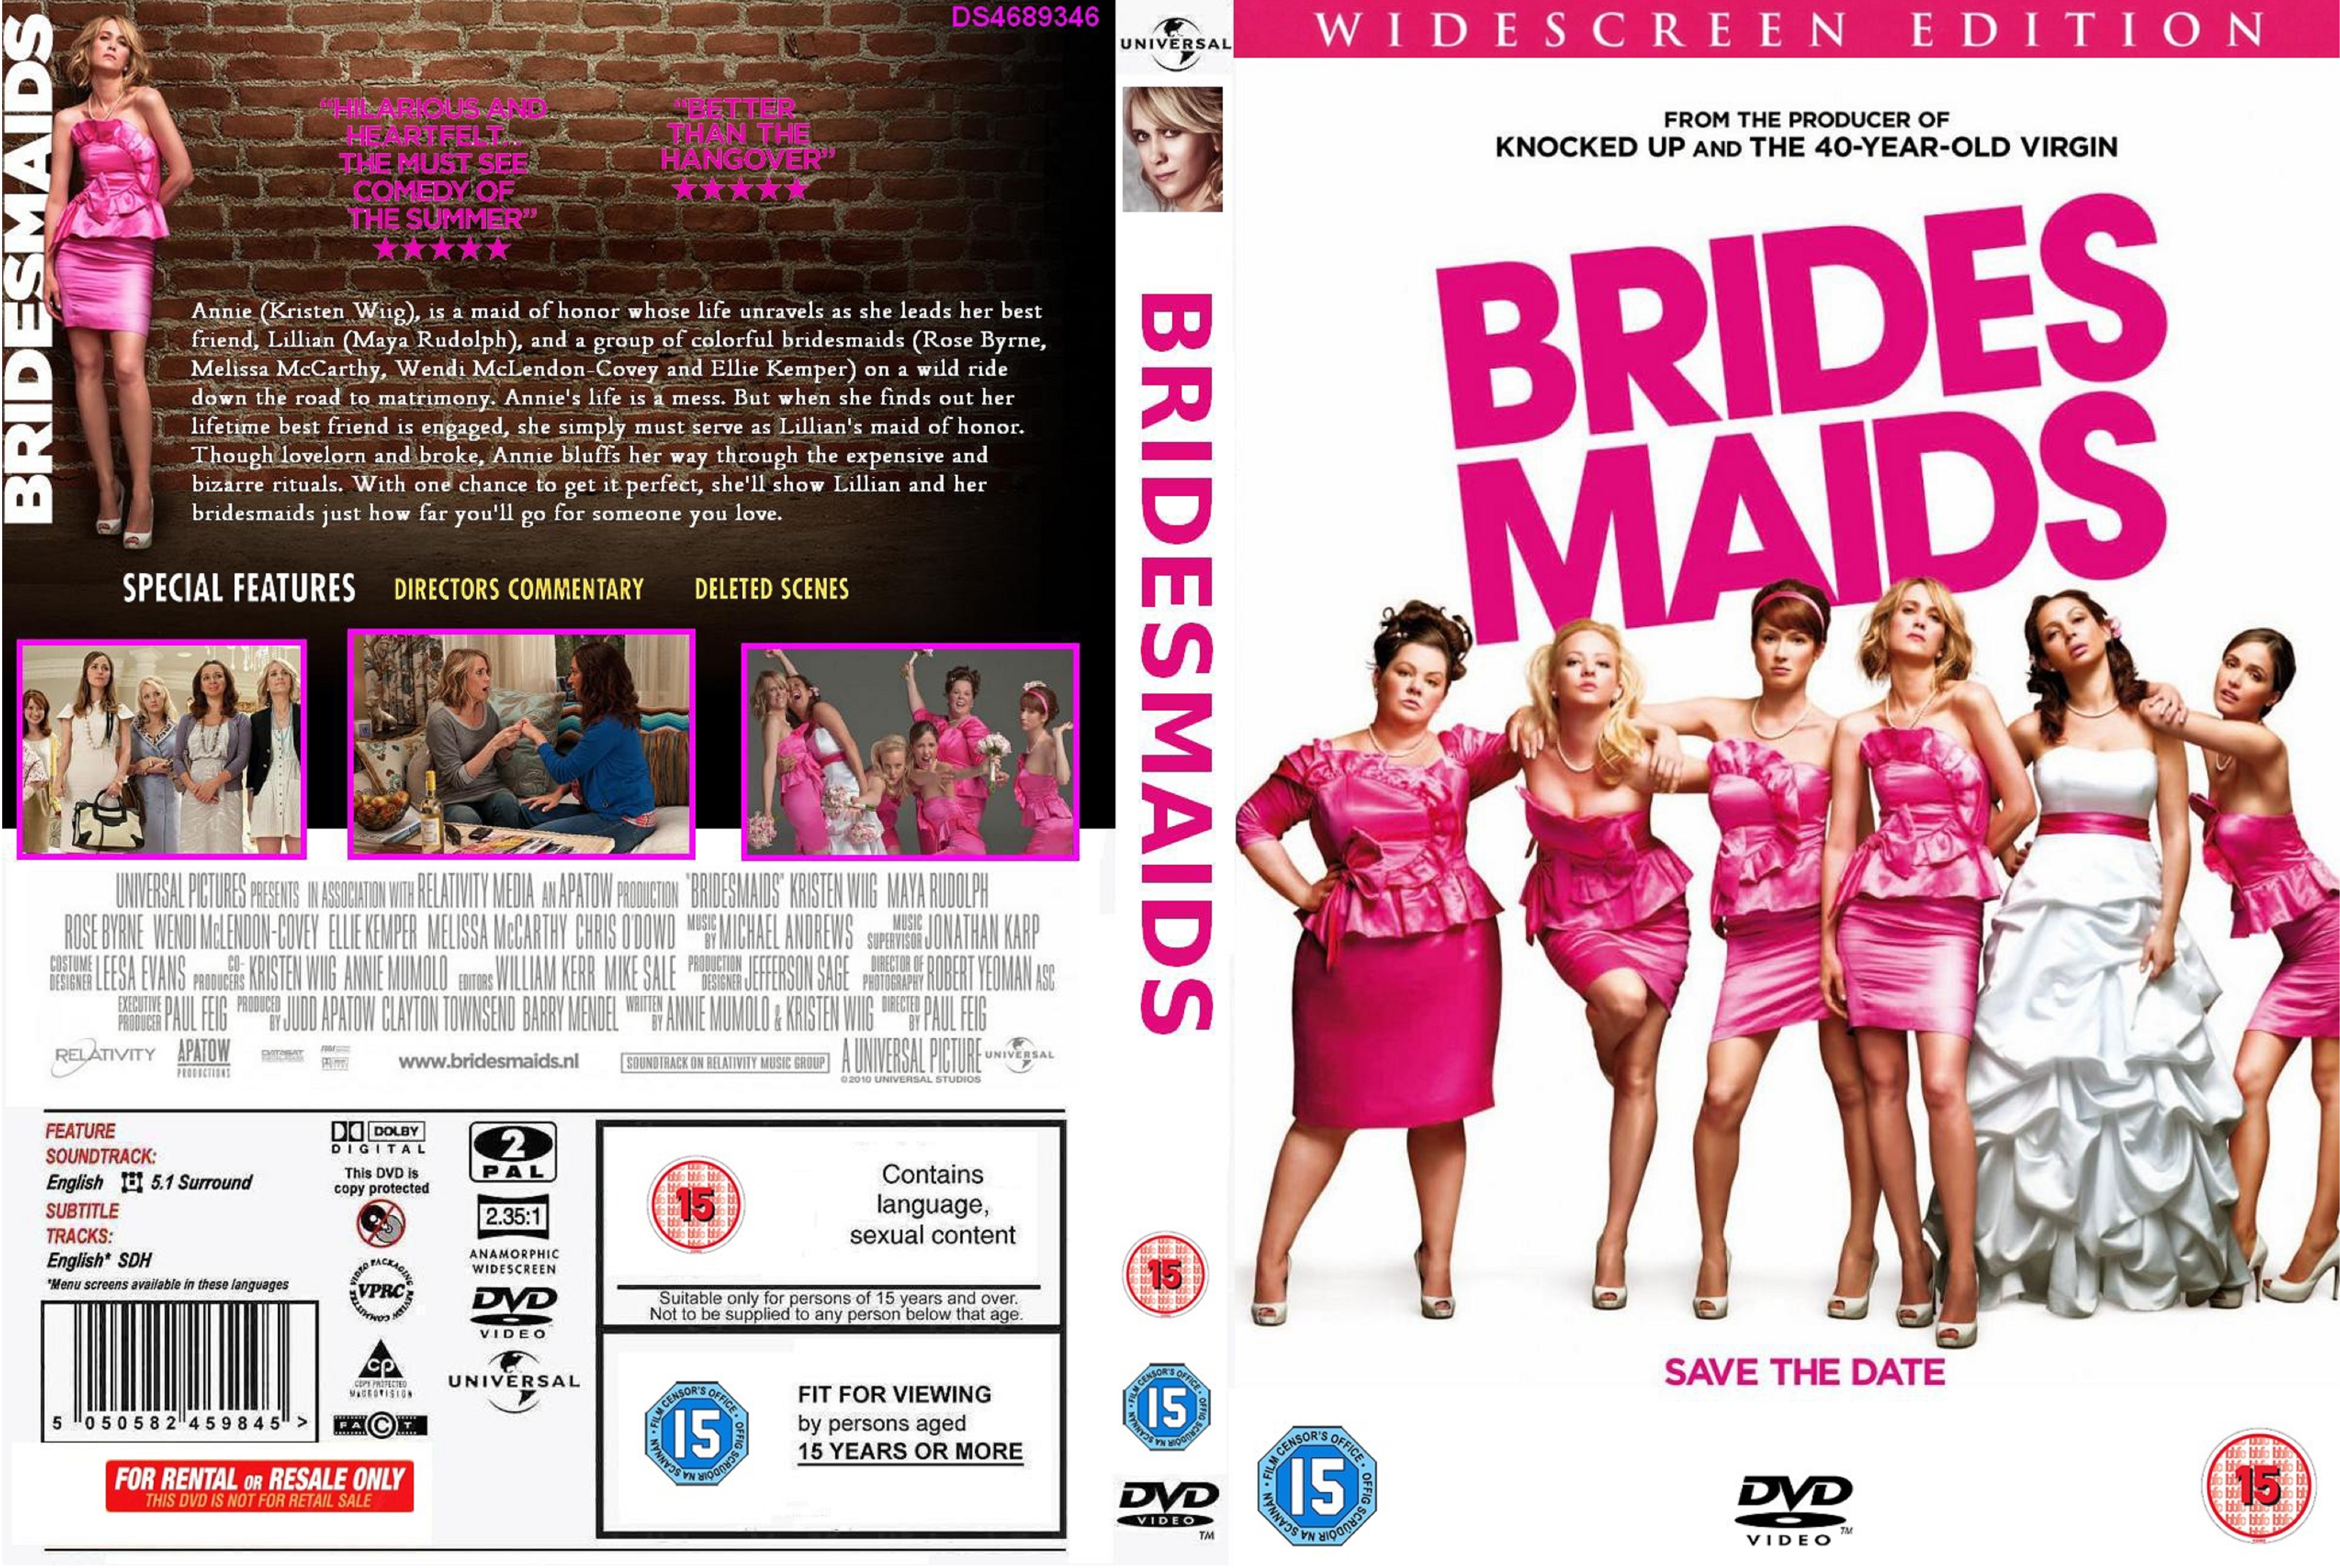 Download Bridesmaids 2011 Full Hd Quality